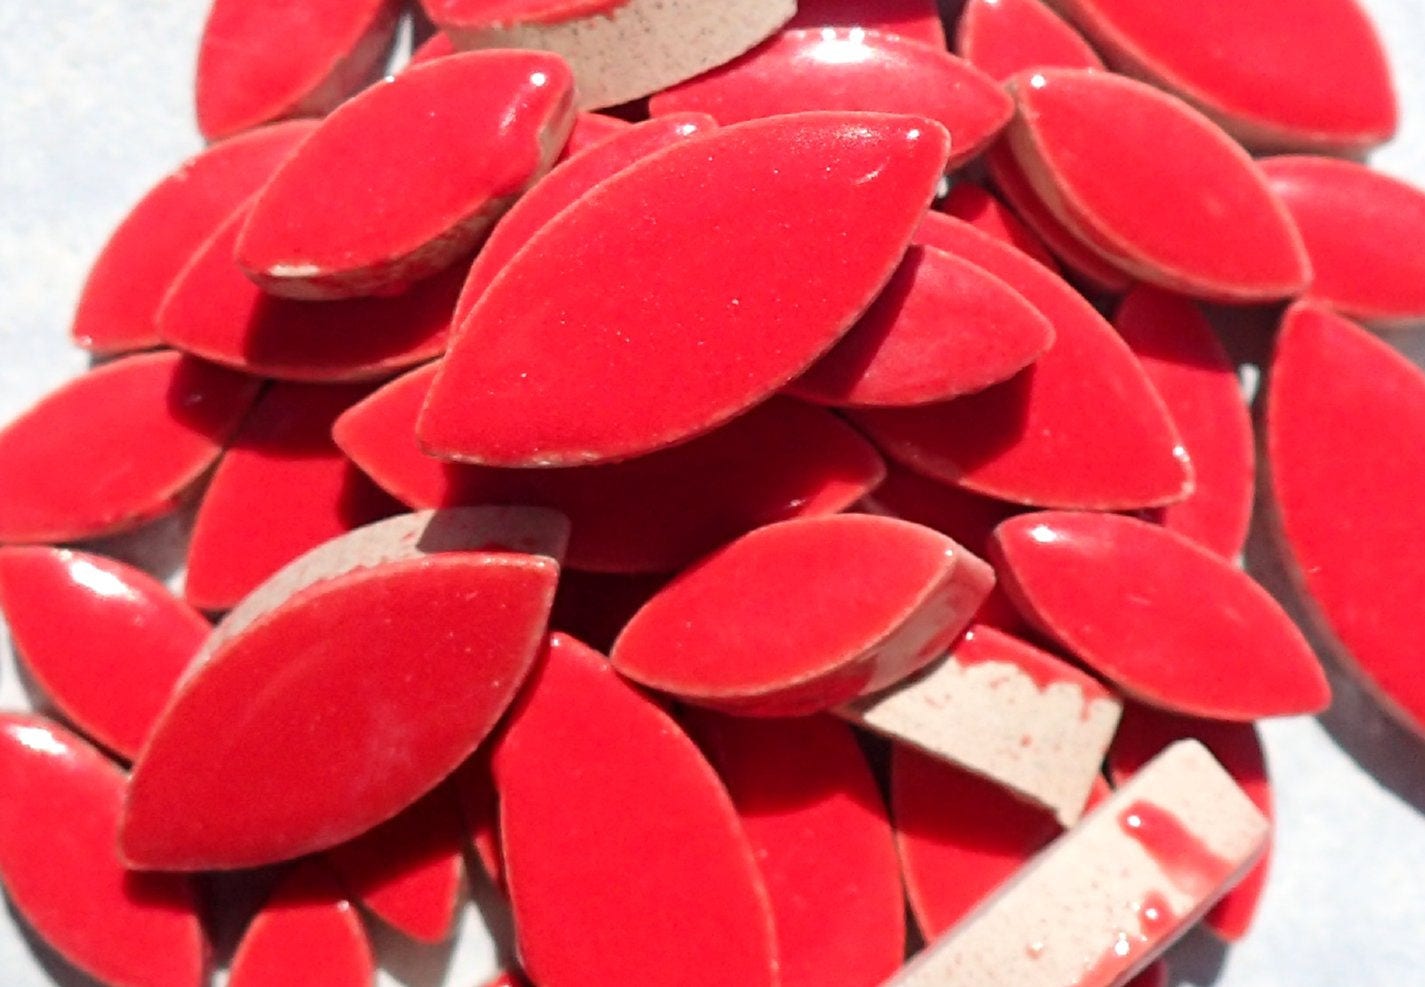 Bright Red Petals Mosaic Tiles - 50g Ceramic Leaves in 2 Sizes